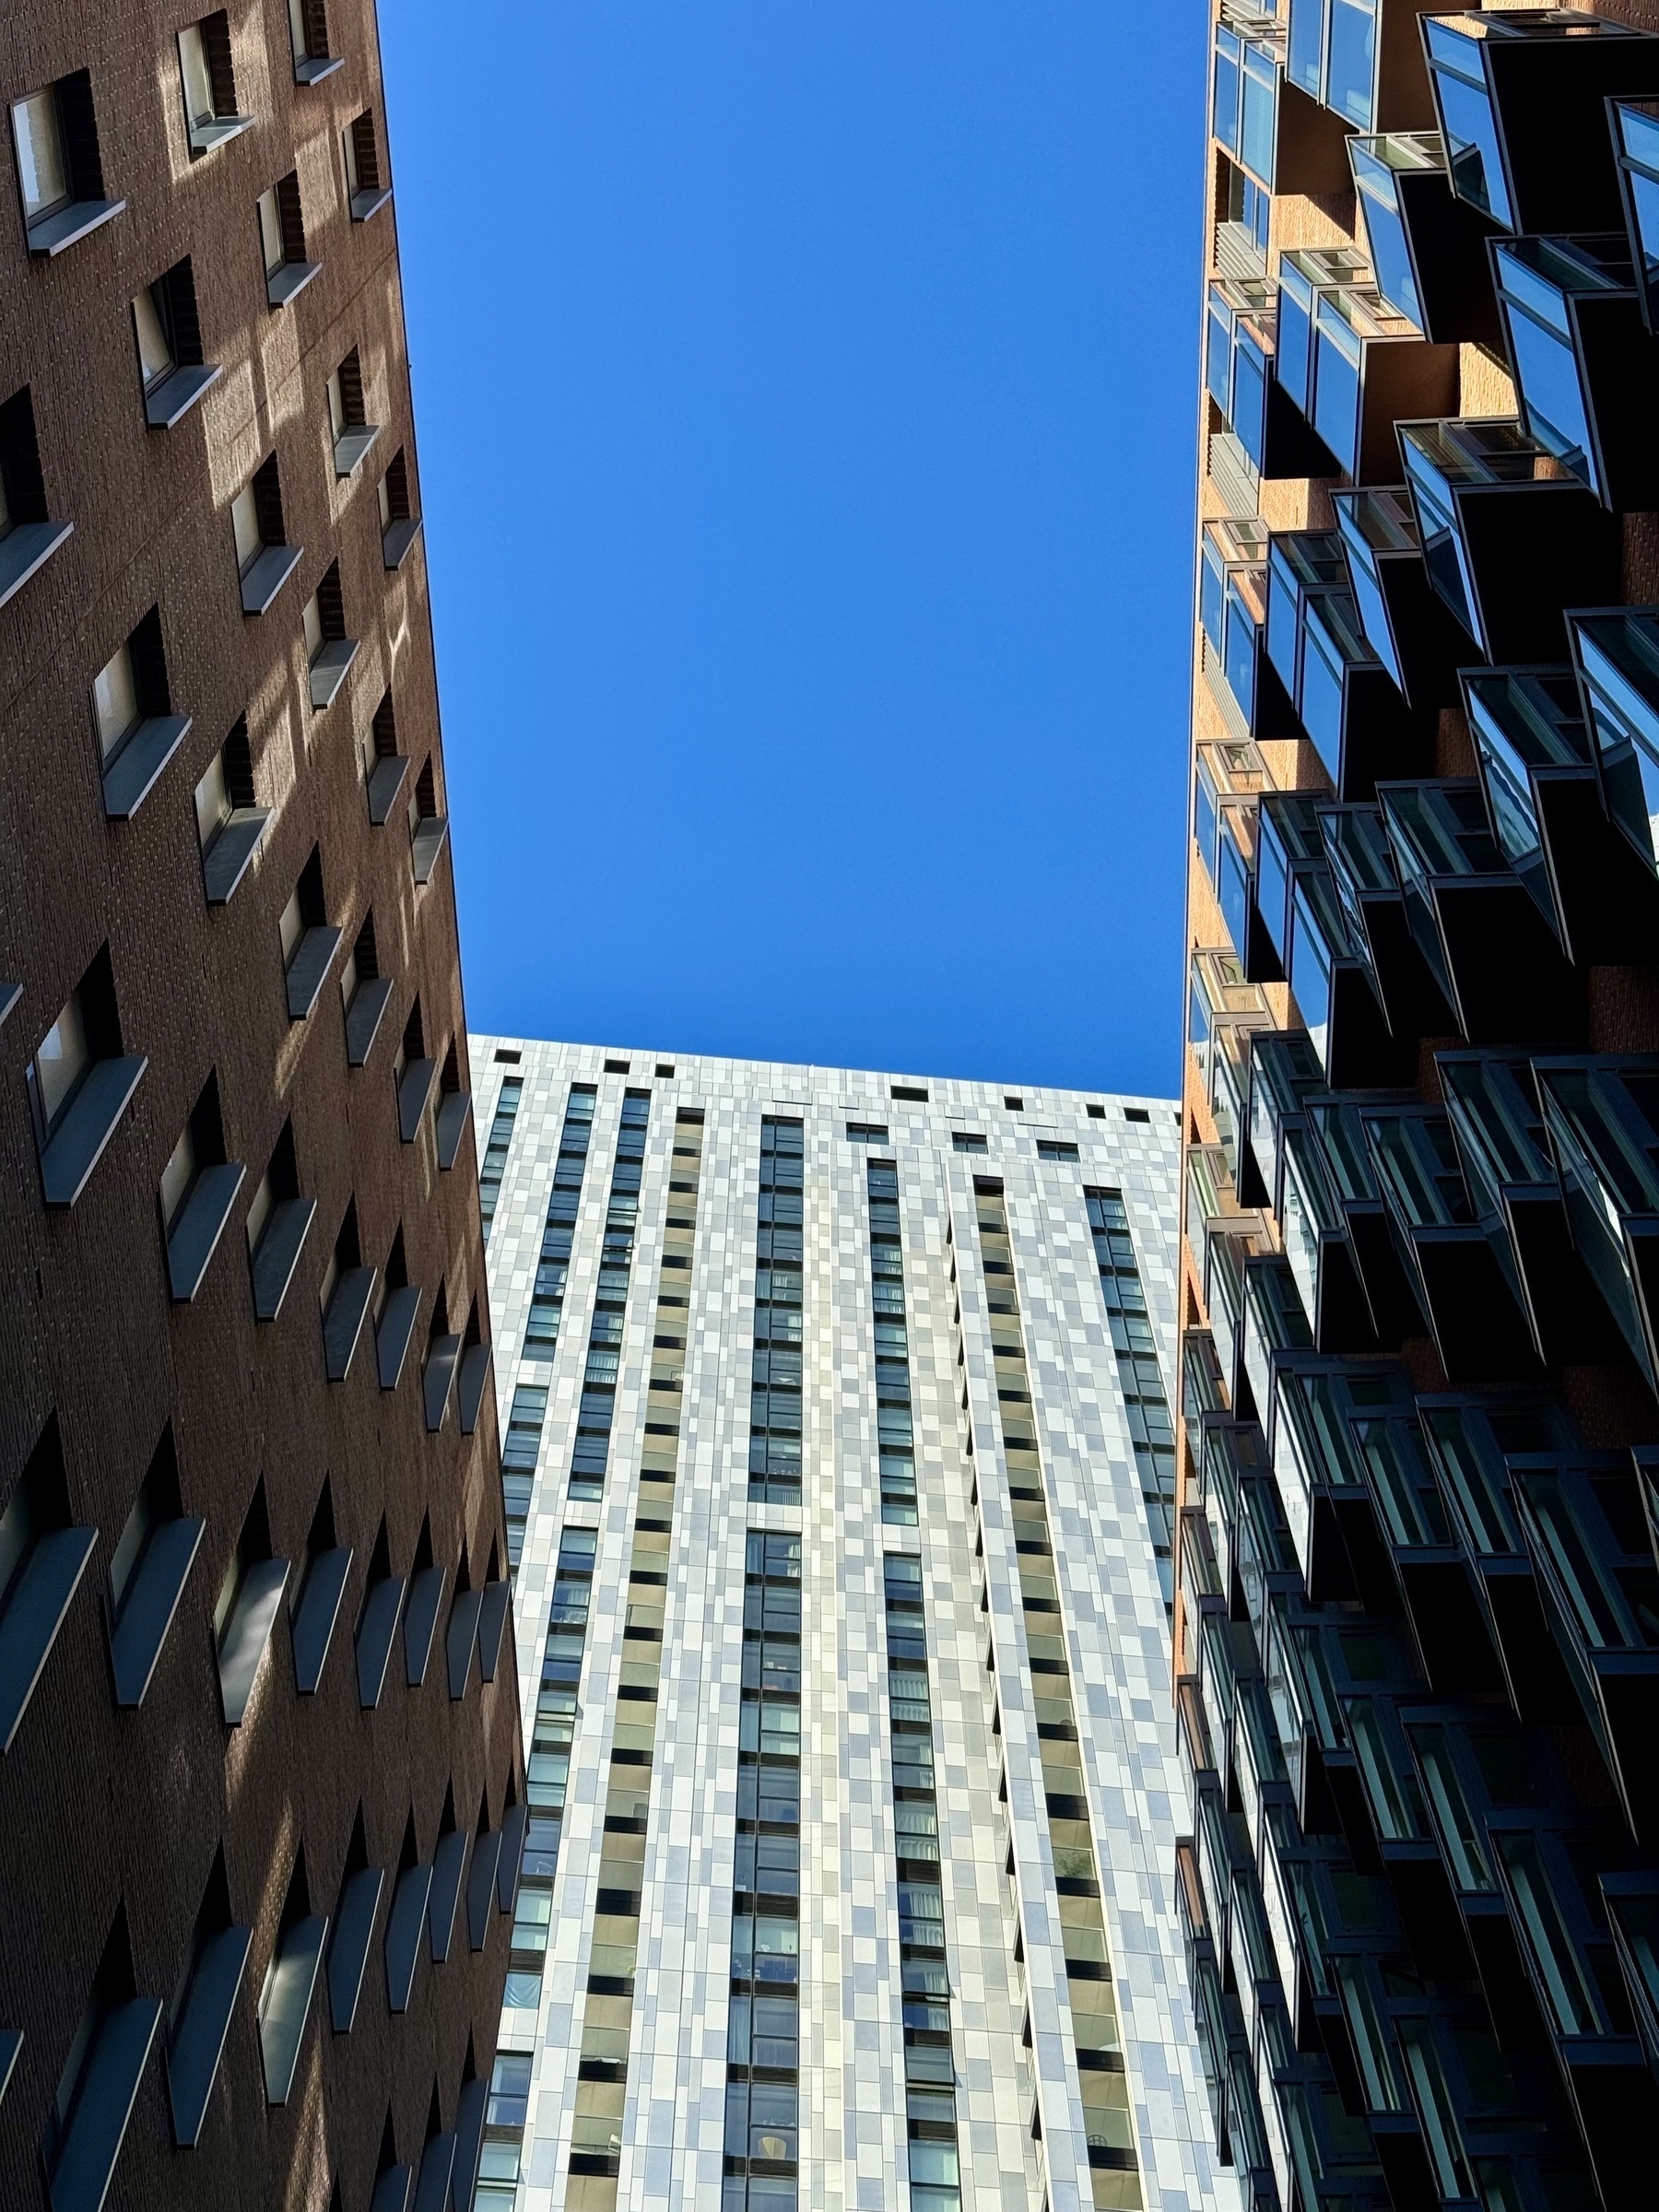 Looking up at three buildings forming a U-shape of bright blue sky.